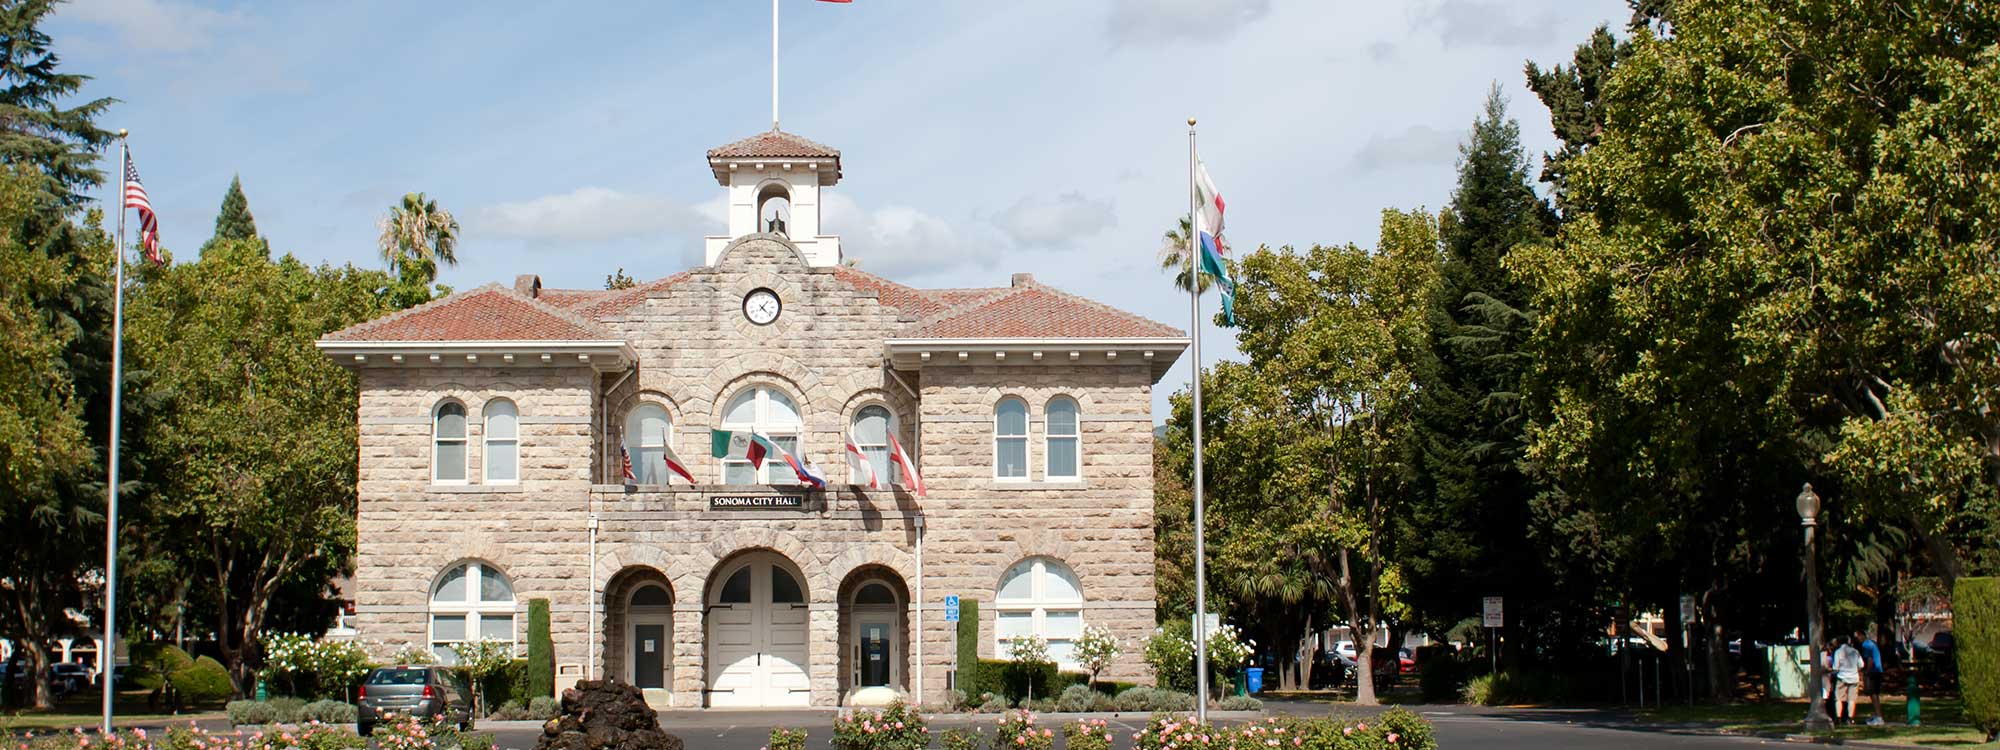 Sonoma City Hall, where the future of the City of Sonoma General Plan will be decided.